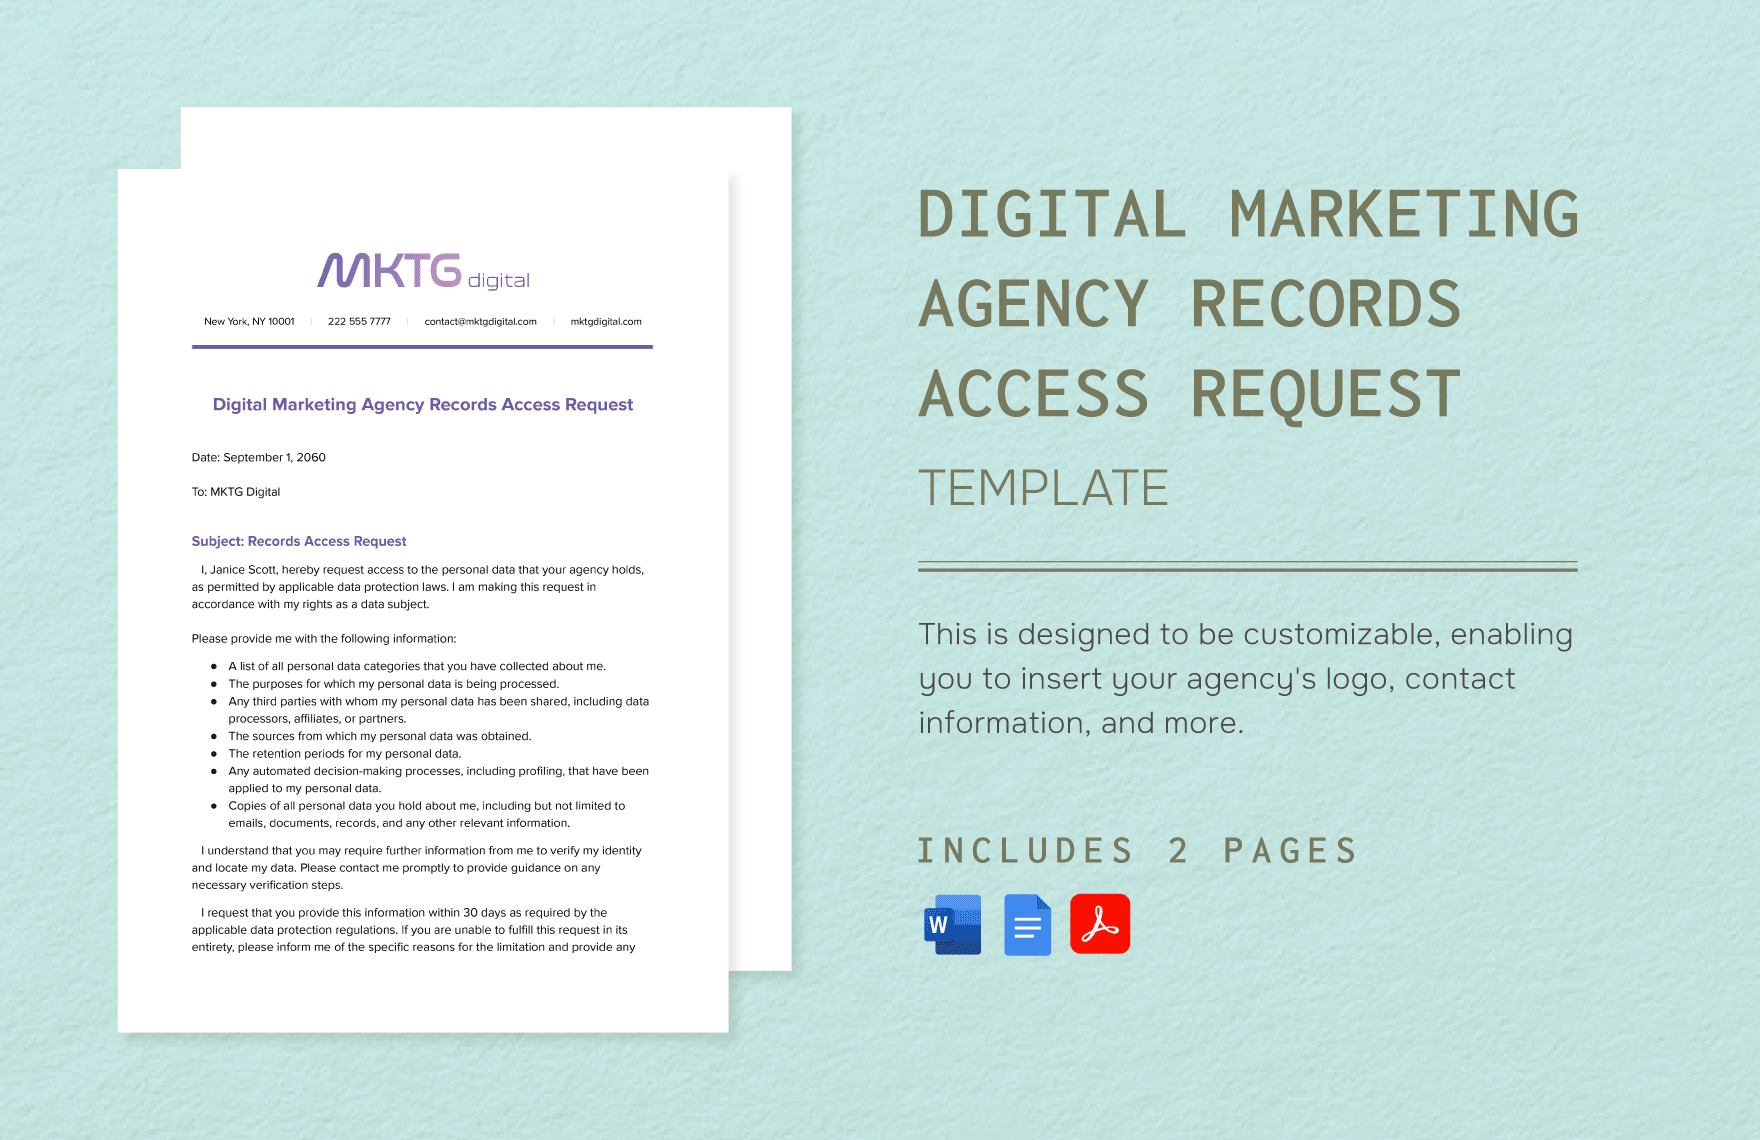 Digital Marketing Agency Records Access Request Template